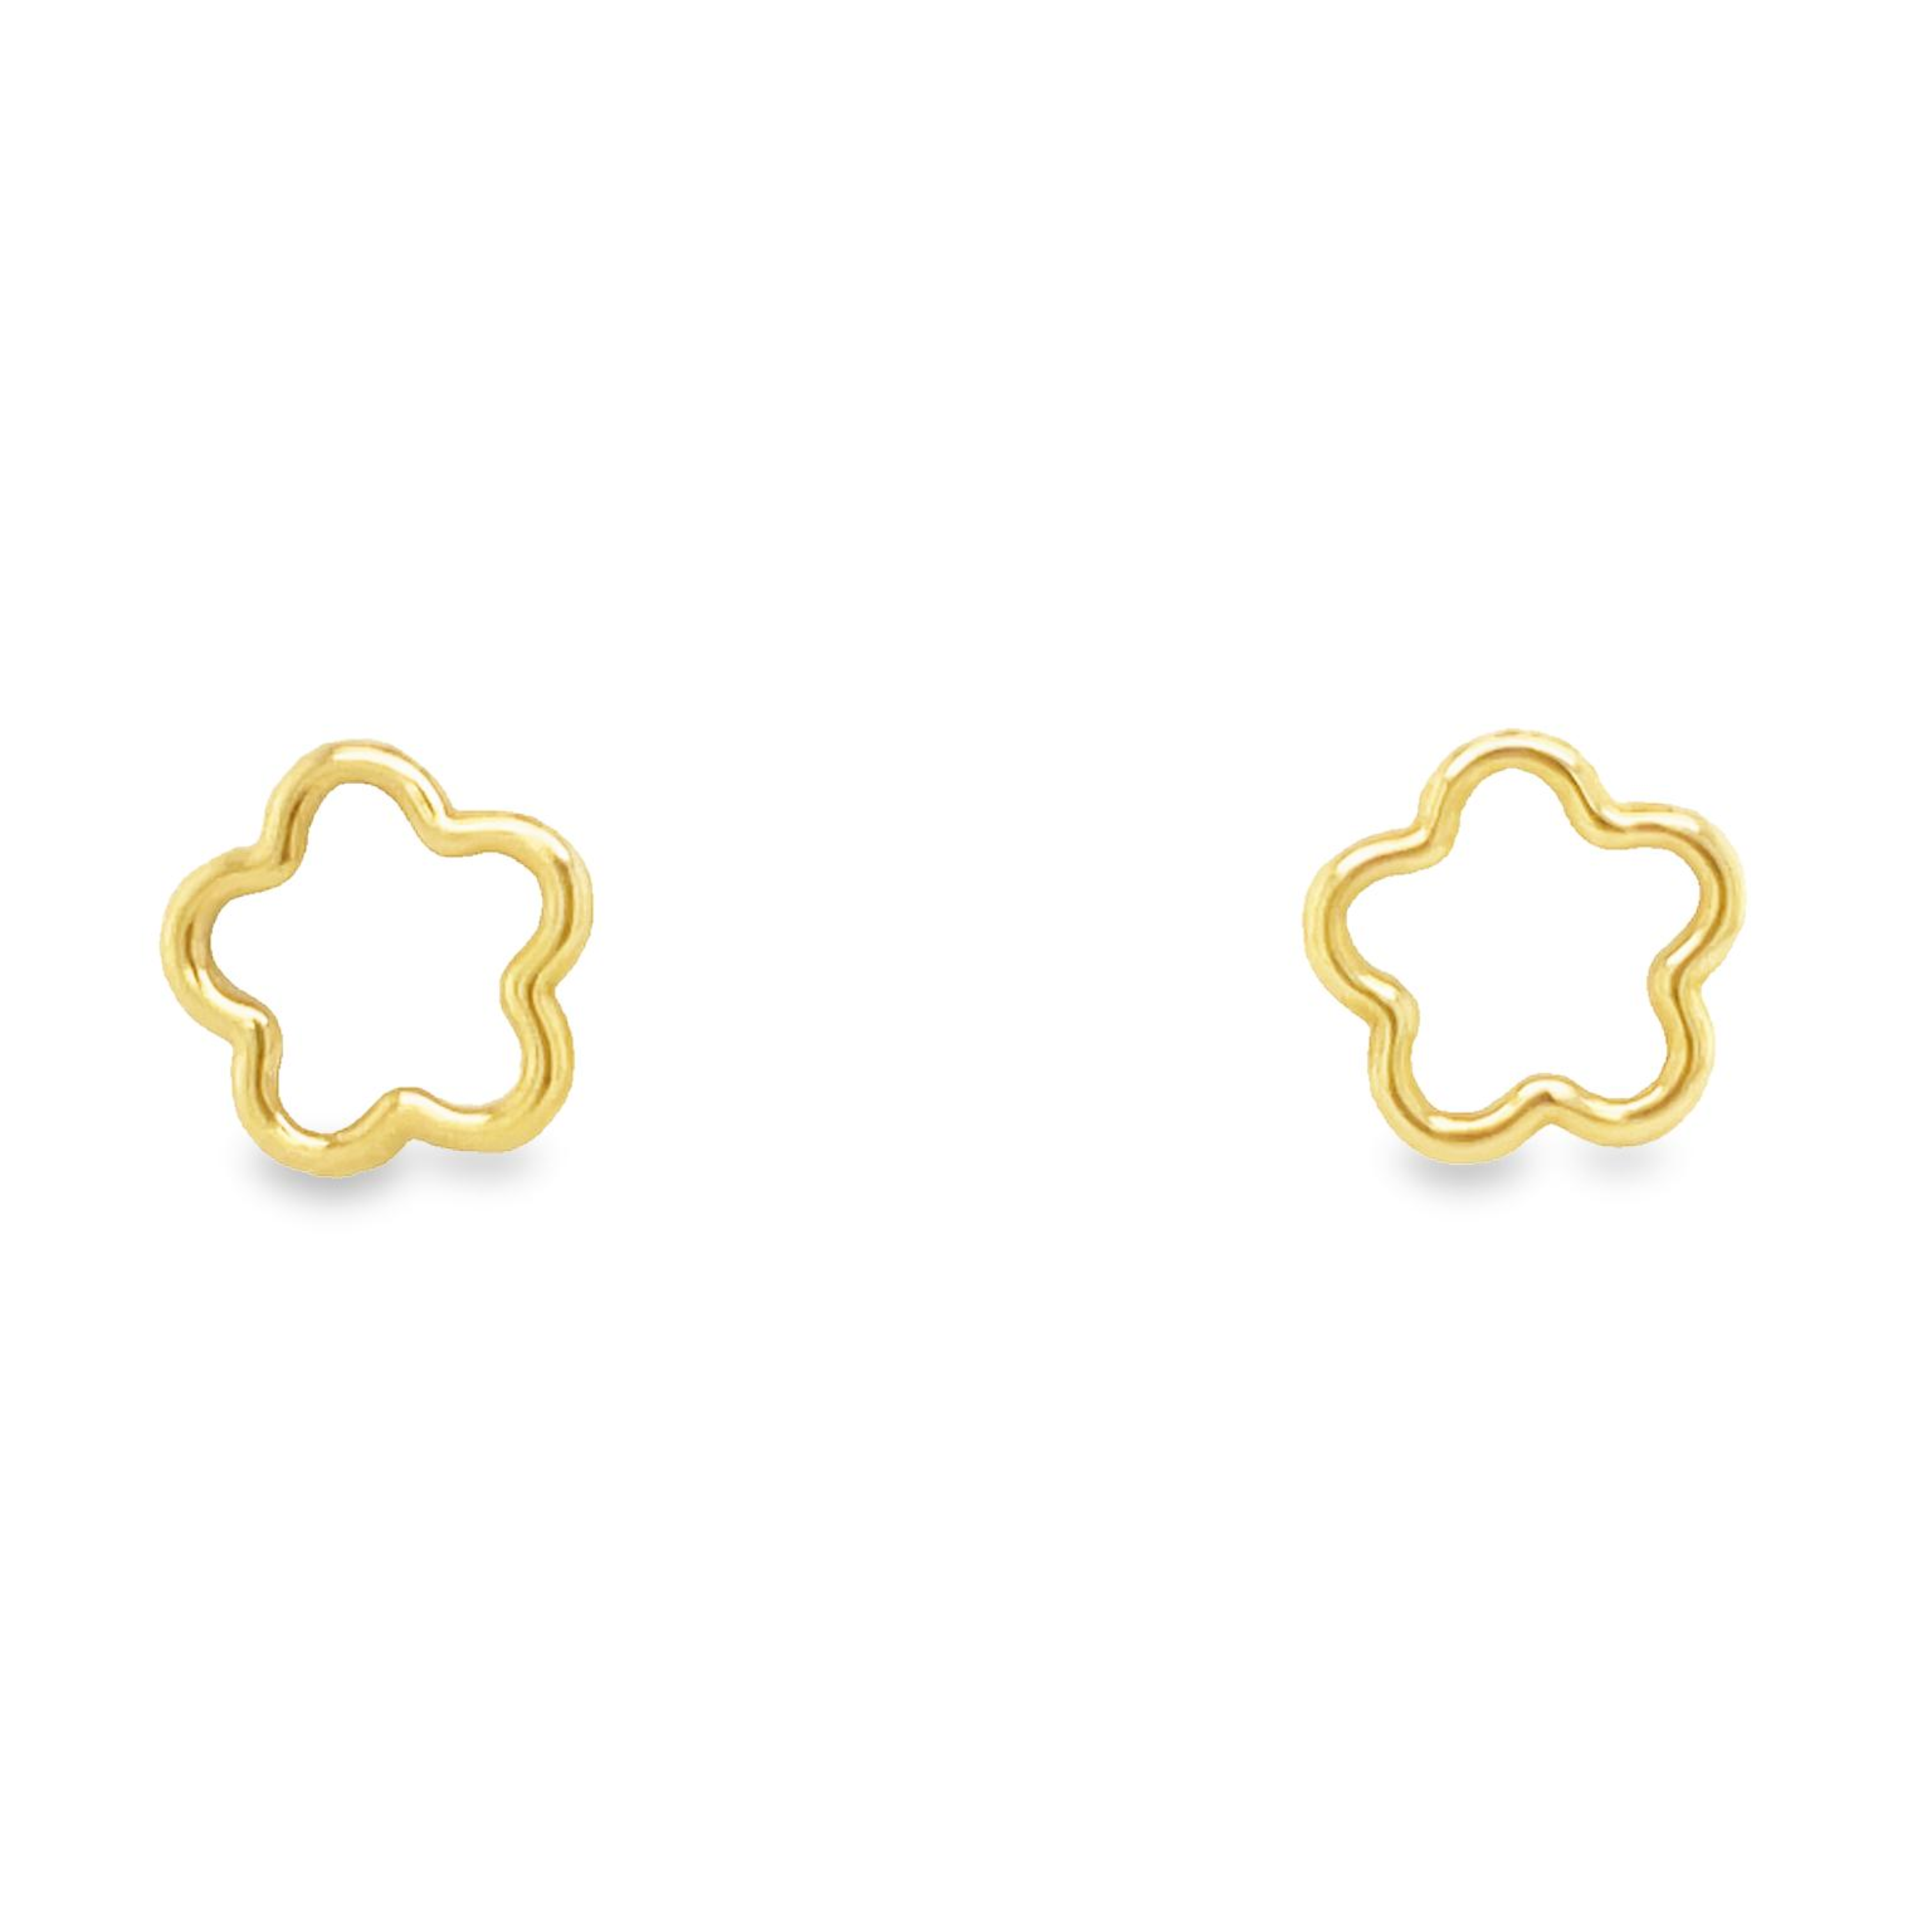 These exquisite flower earrings for babies feature 14k yellow gold construction with mother of pearl securely affixed using baby screw backs.